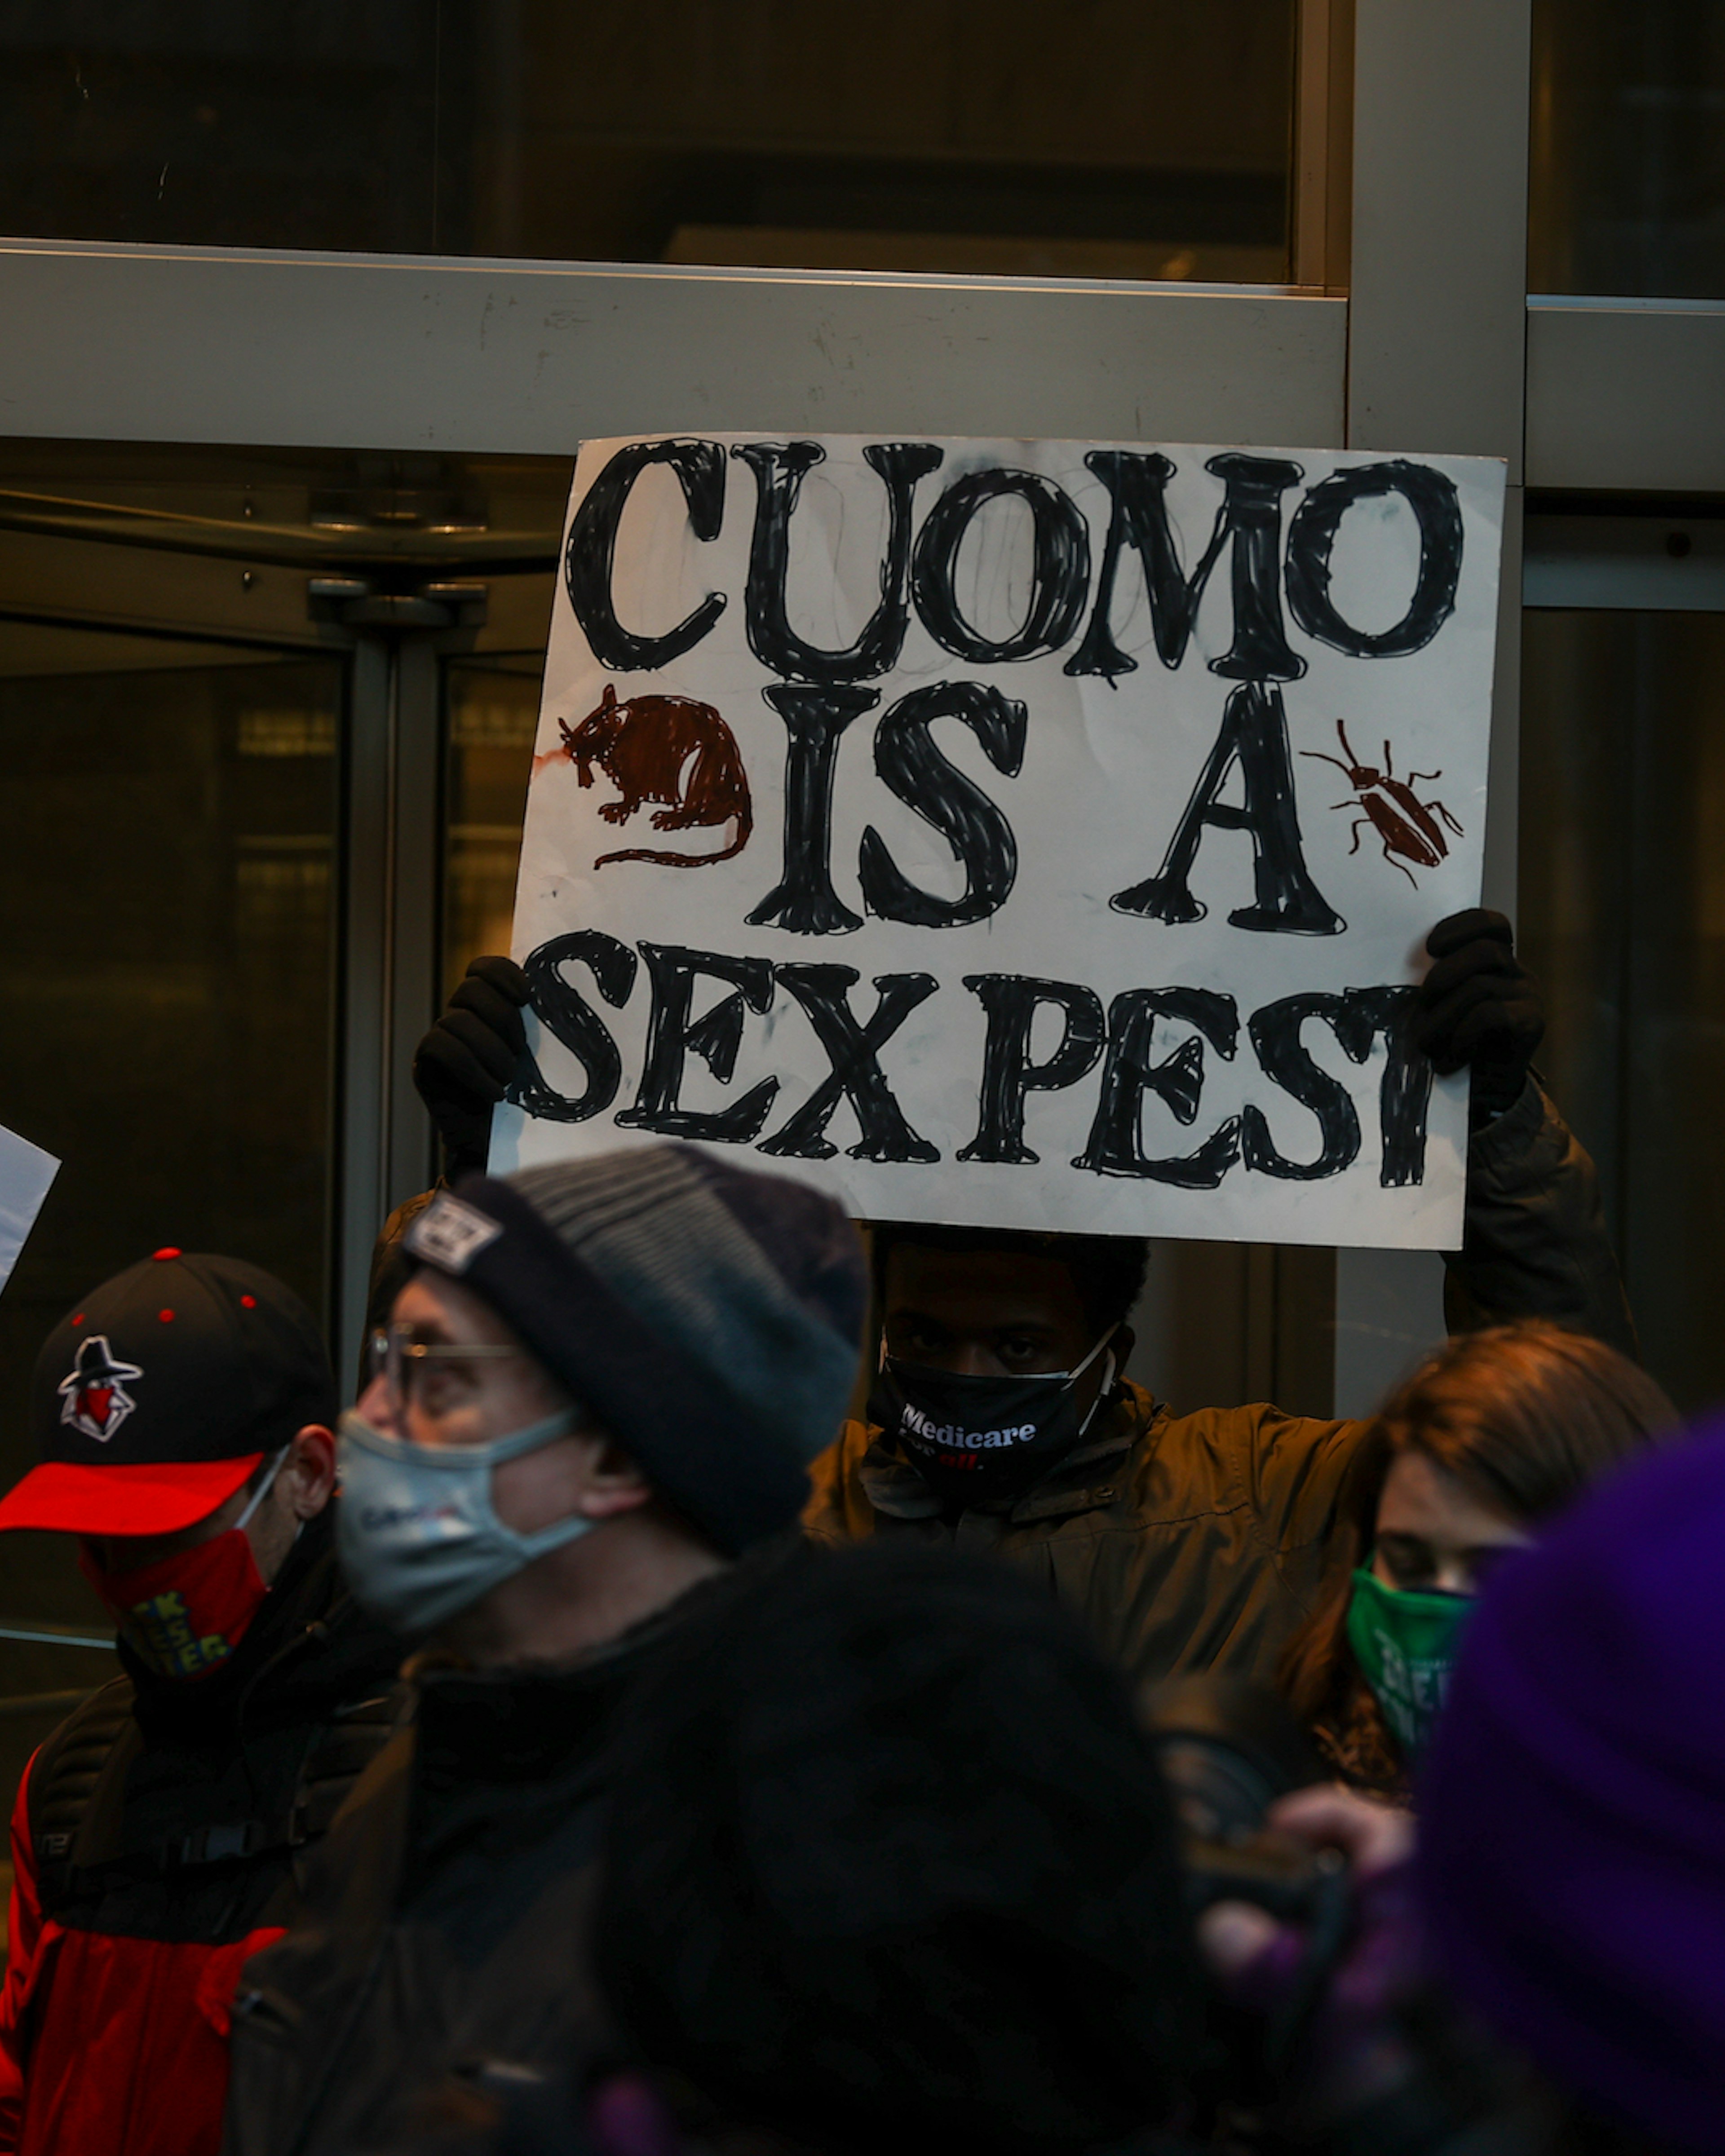 A group of protesters are calling for Governor Andrew Cuomo's resignation following a series of sexual harassment accusations and an attempted cover up of nursing home deaths resulting from pandemic response mismanagement in front of his NYC office in Manhattan of New York City, United States on March 02, 2021. . (Photo by Tayfun Coskun/Anadolu Agency via Getty Images)